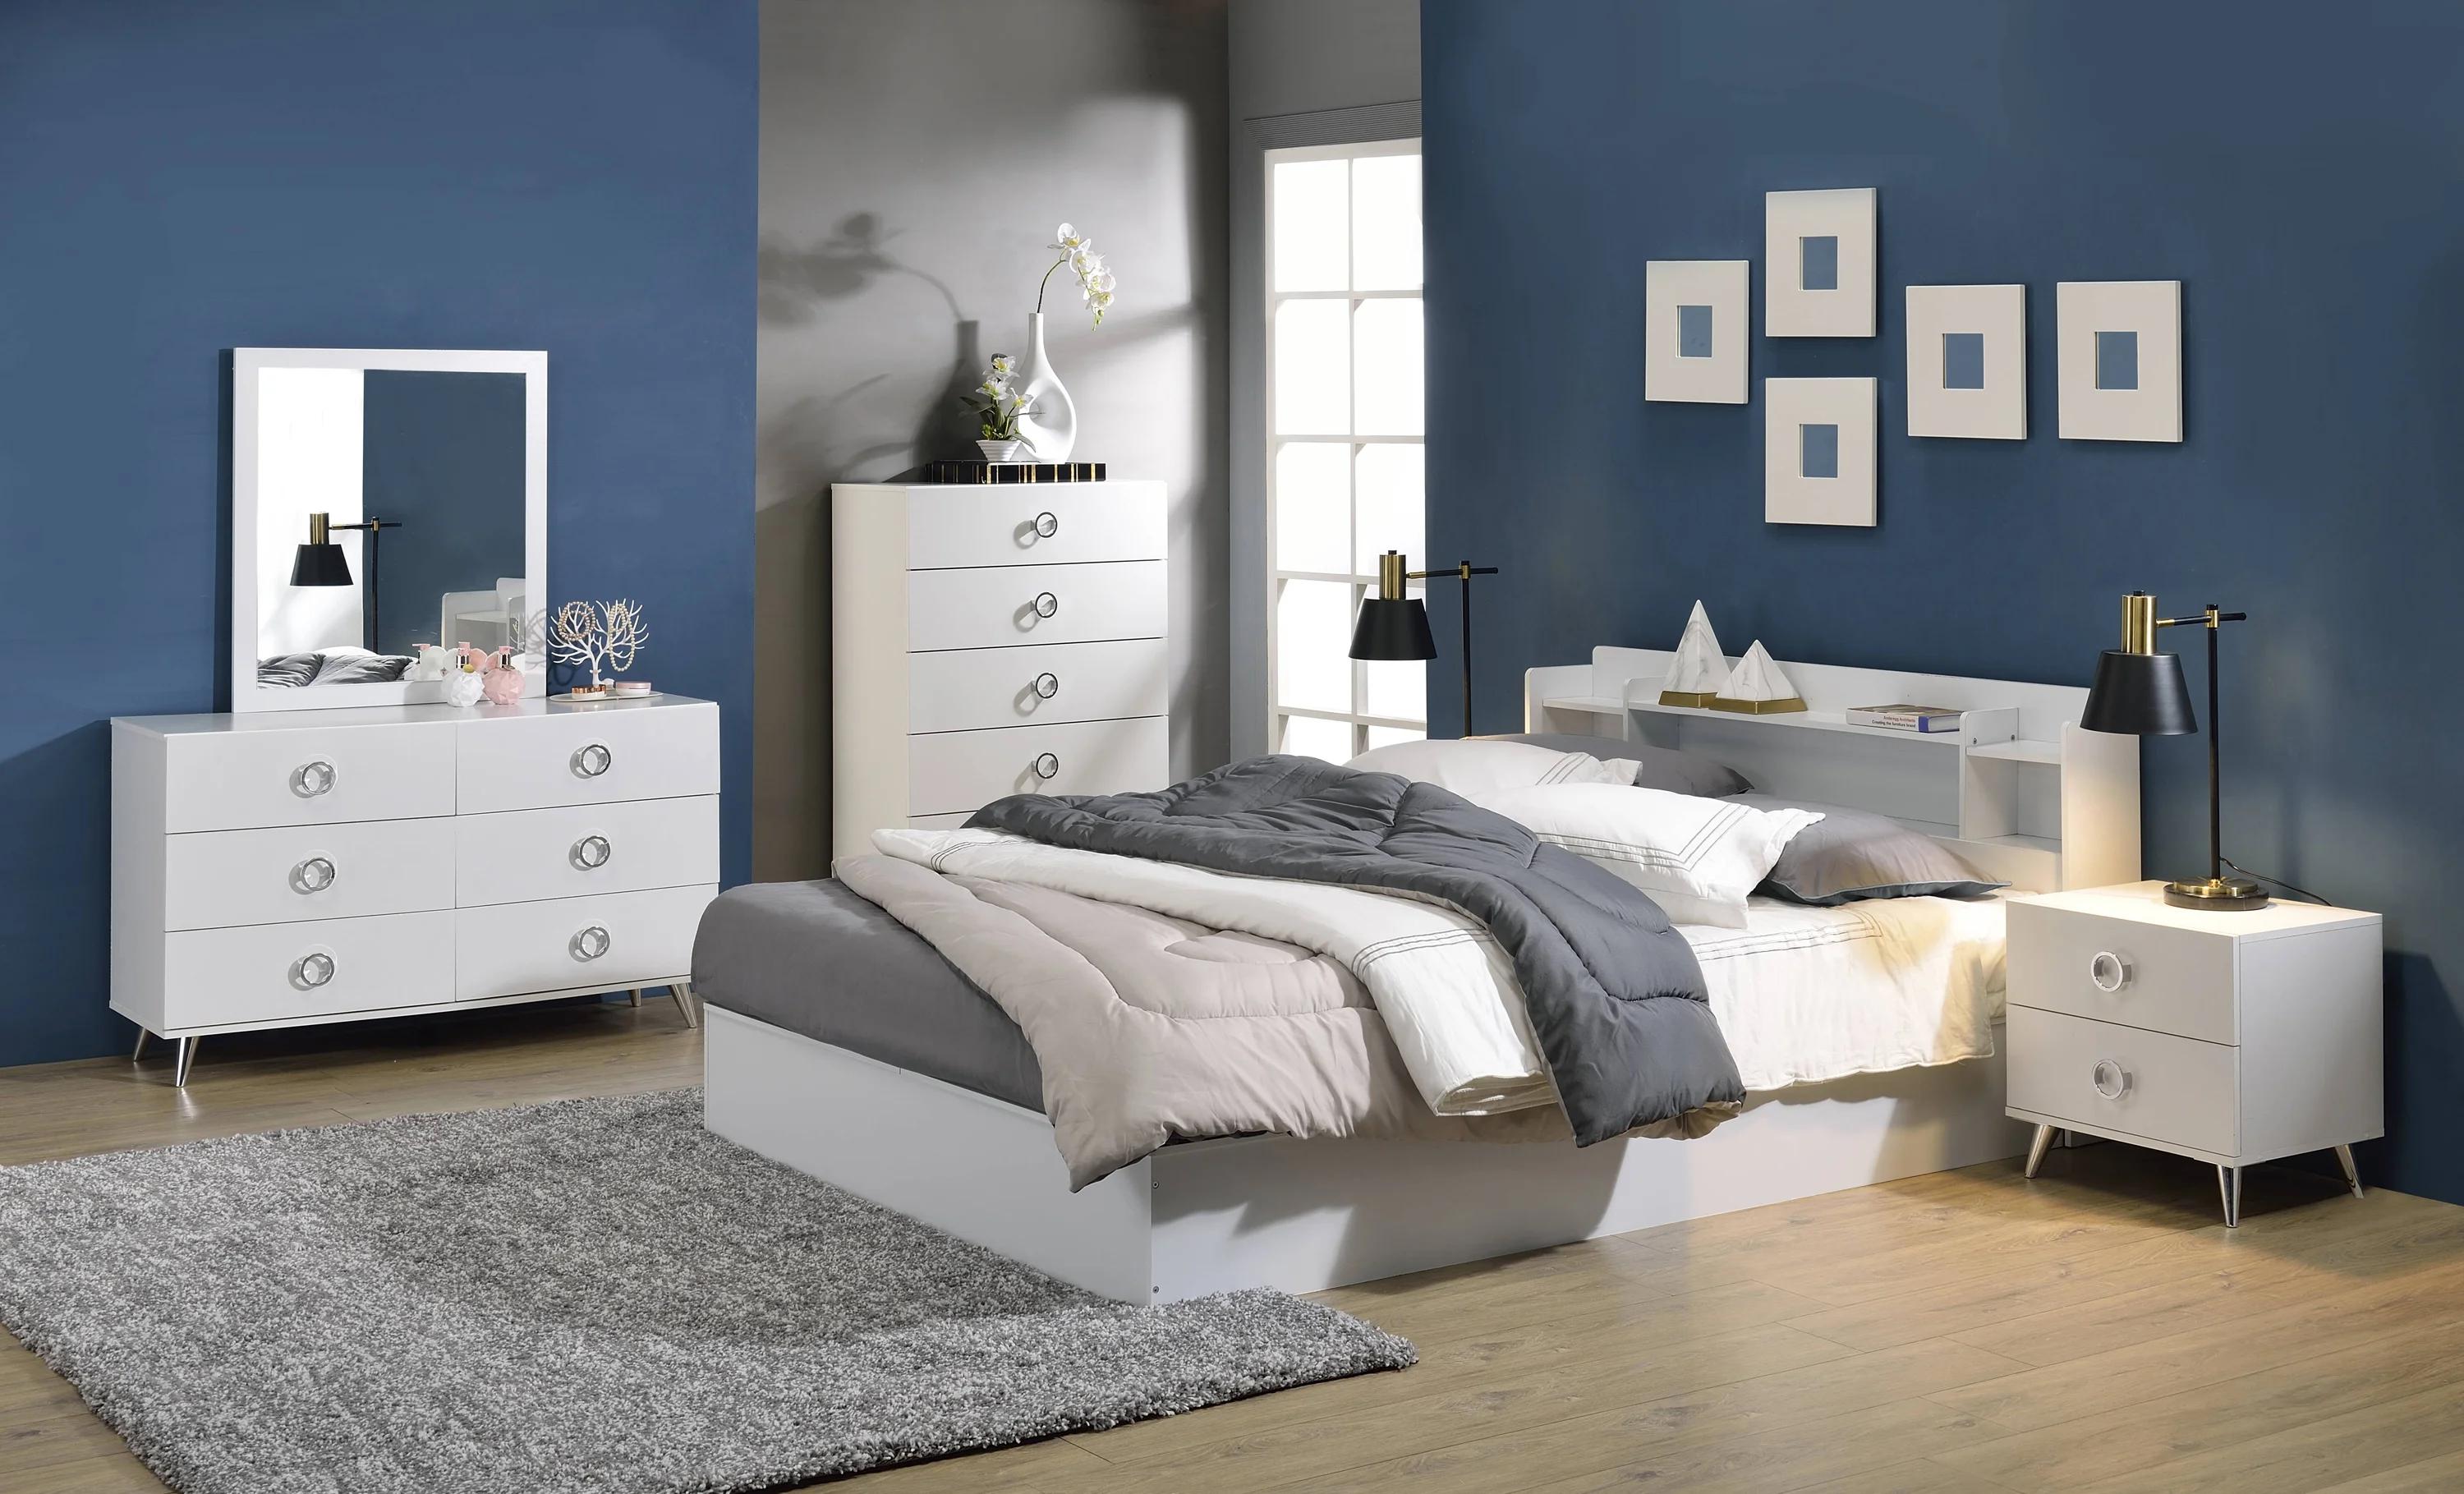 

    
BD00548Q Acme Furniture Queen Bed
